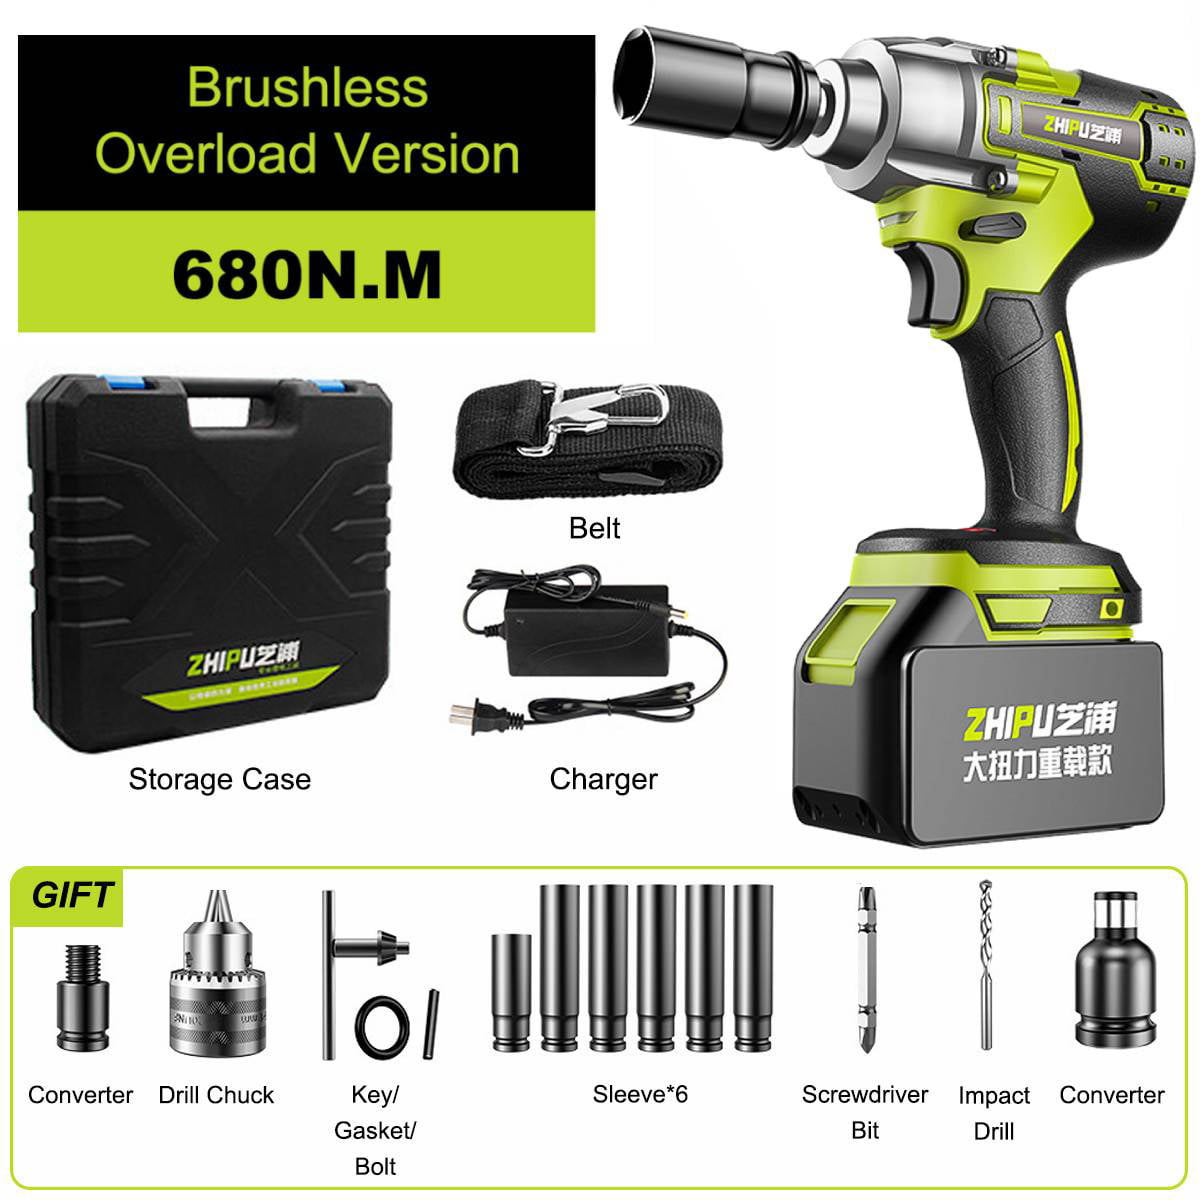 Body Only Brushless Impact Driver 45Nm Cordless Impact Wrench Drill Driver 18V 